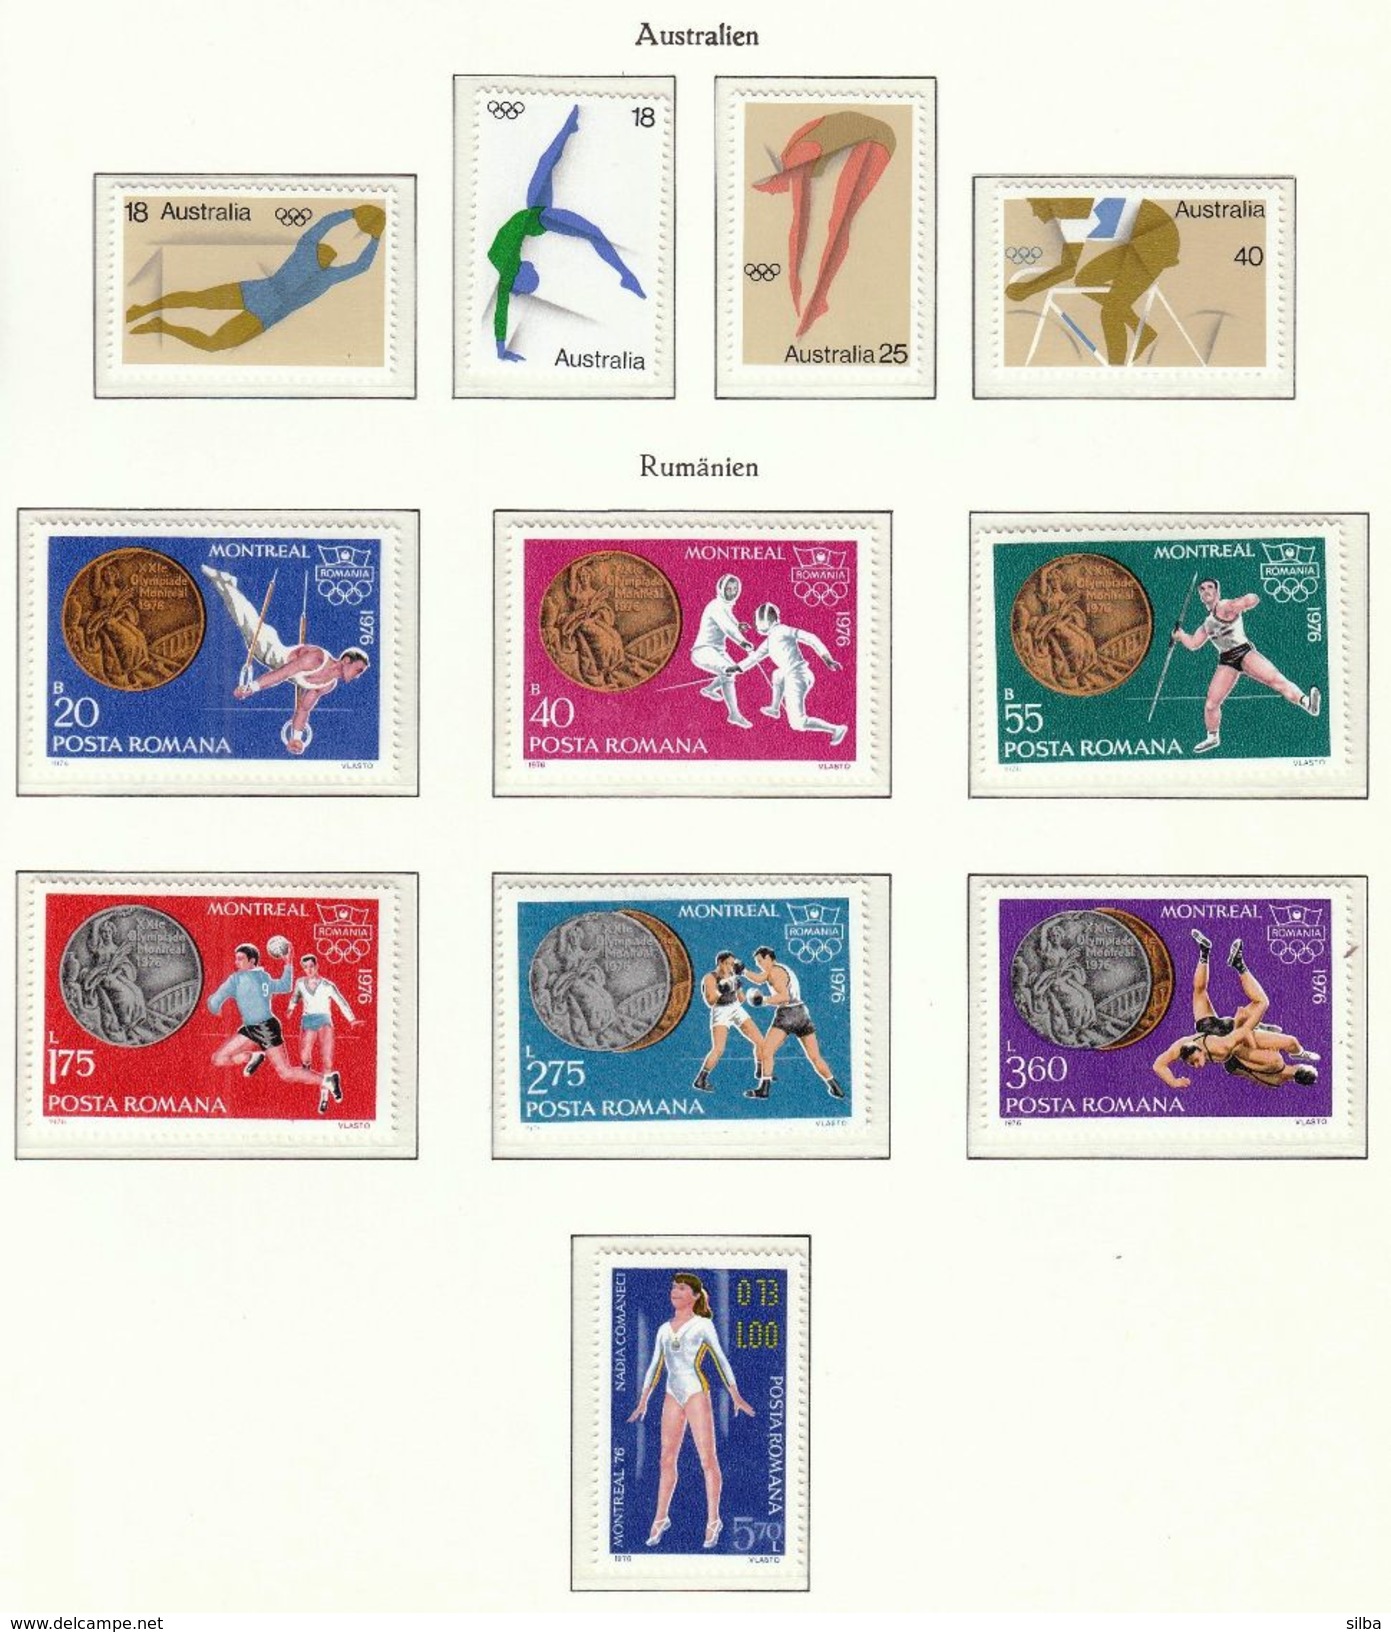 Australia, Romania / Olympic Games Montreal 1976 / Football, Gymnastics, Diving, Cycling, Fencing, Athletics, Boxing - Sommer 1976: Montreal